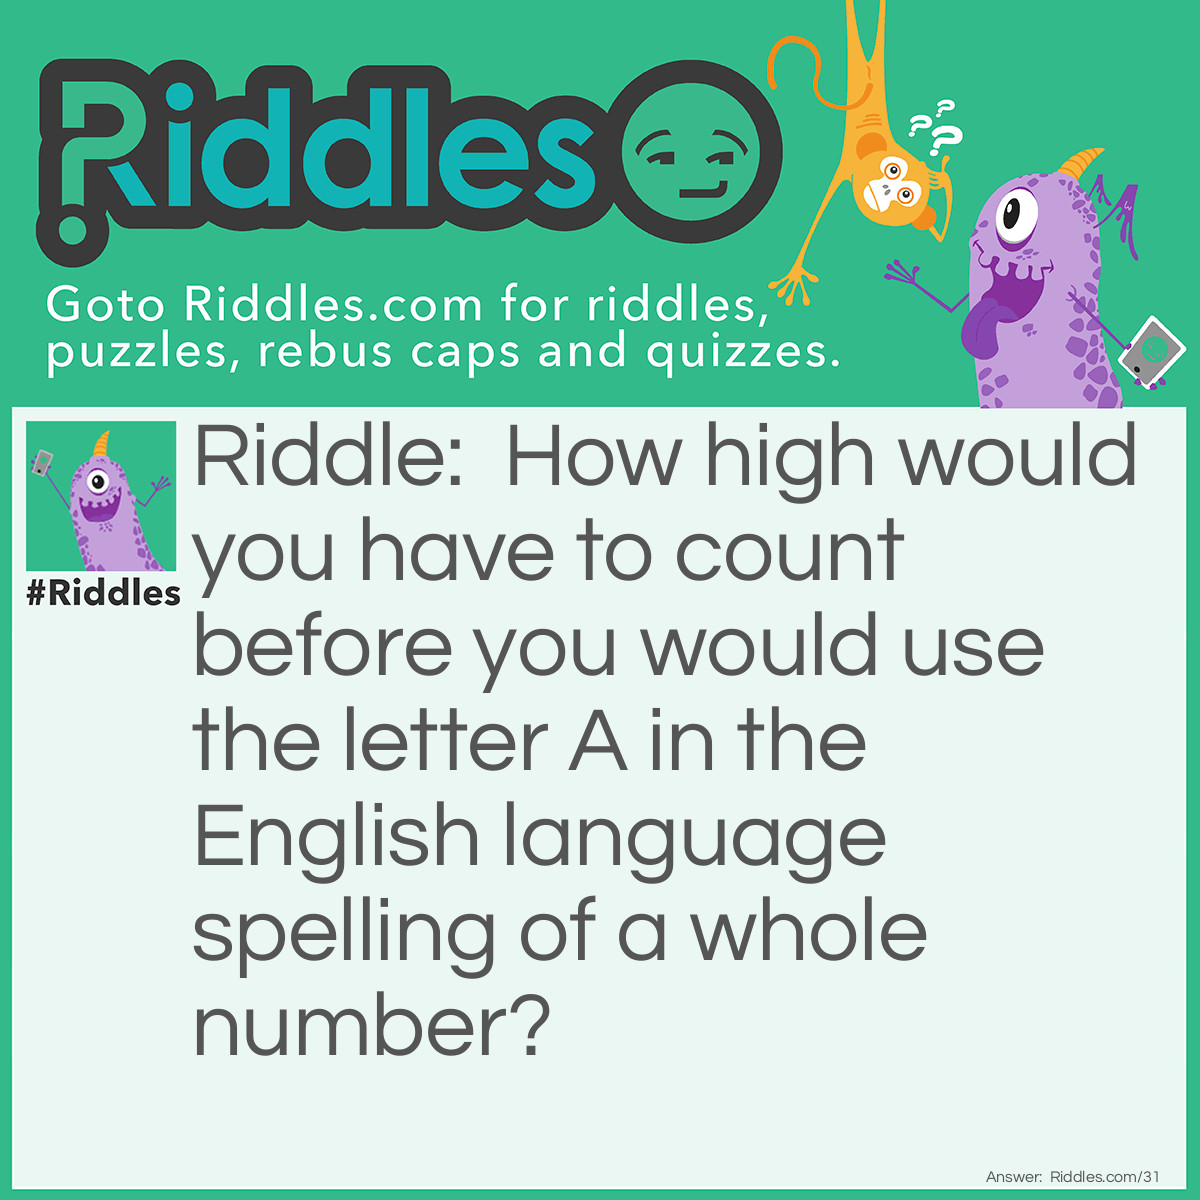 Riddle: How high would you have to count before you would use the letter A in the English language spelling of a whole number? Answer: One thousand.